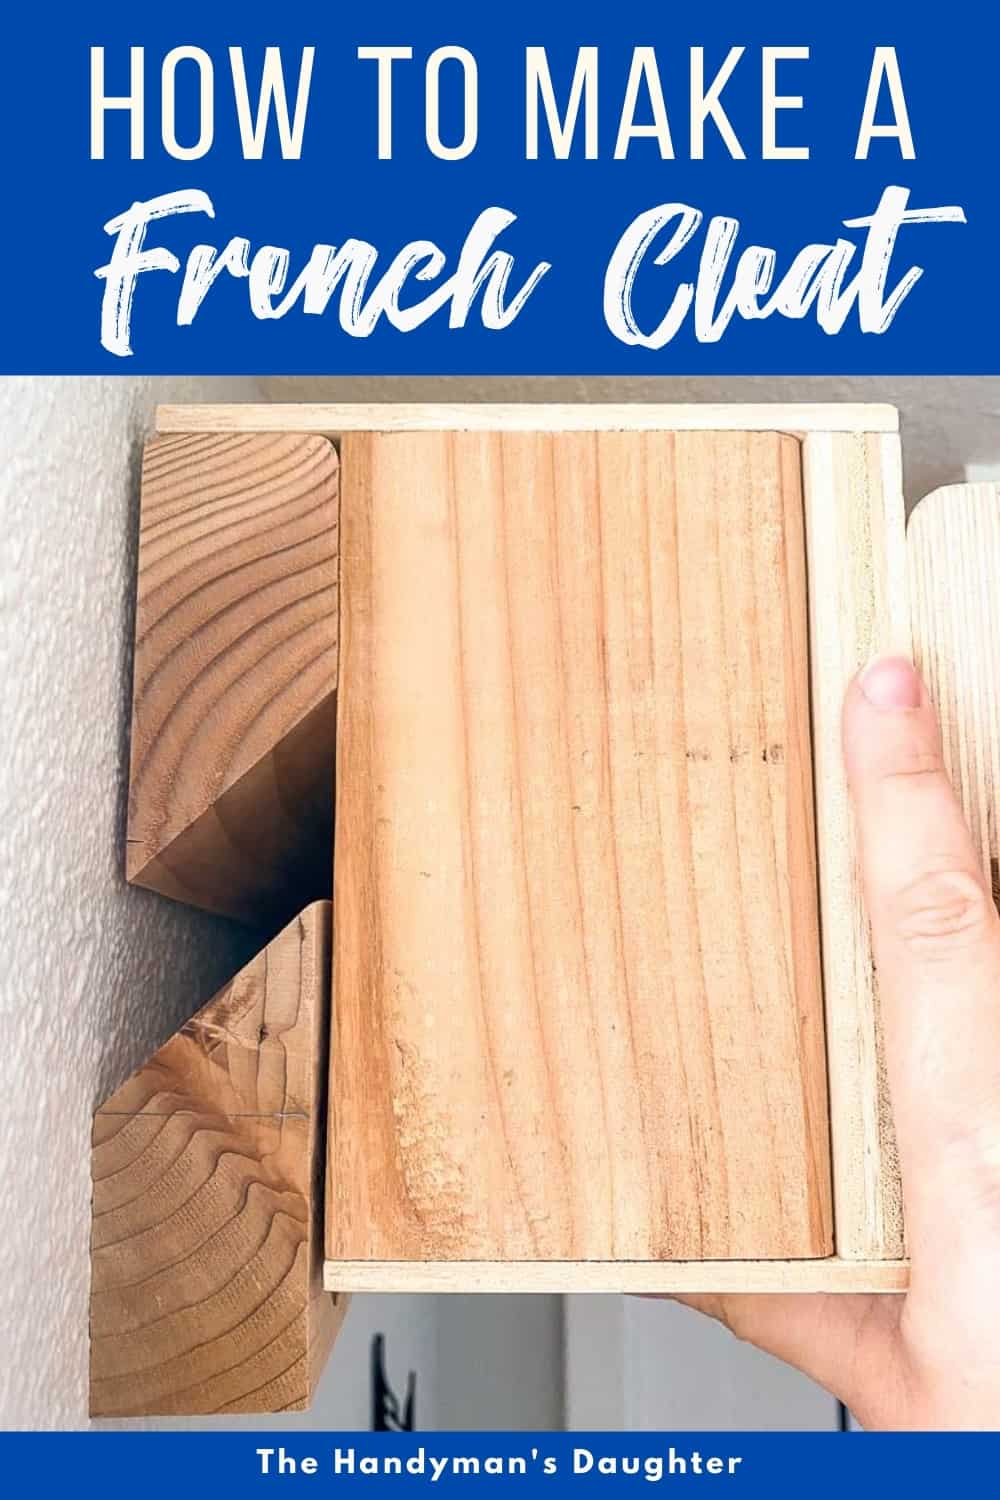 How to Make a French Cleat